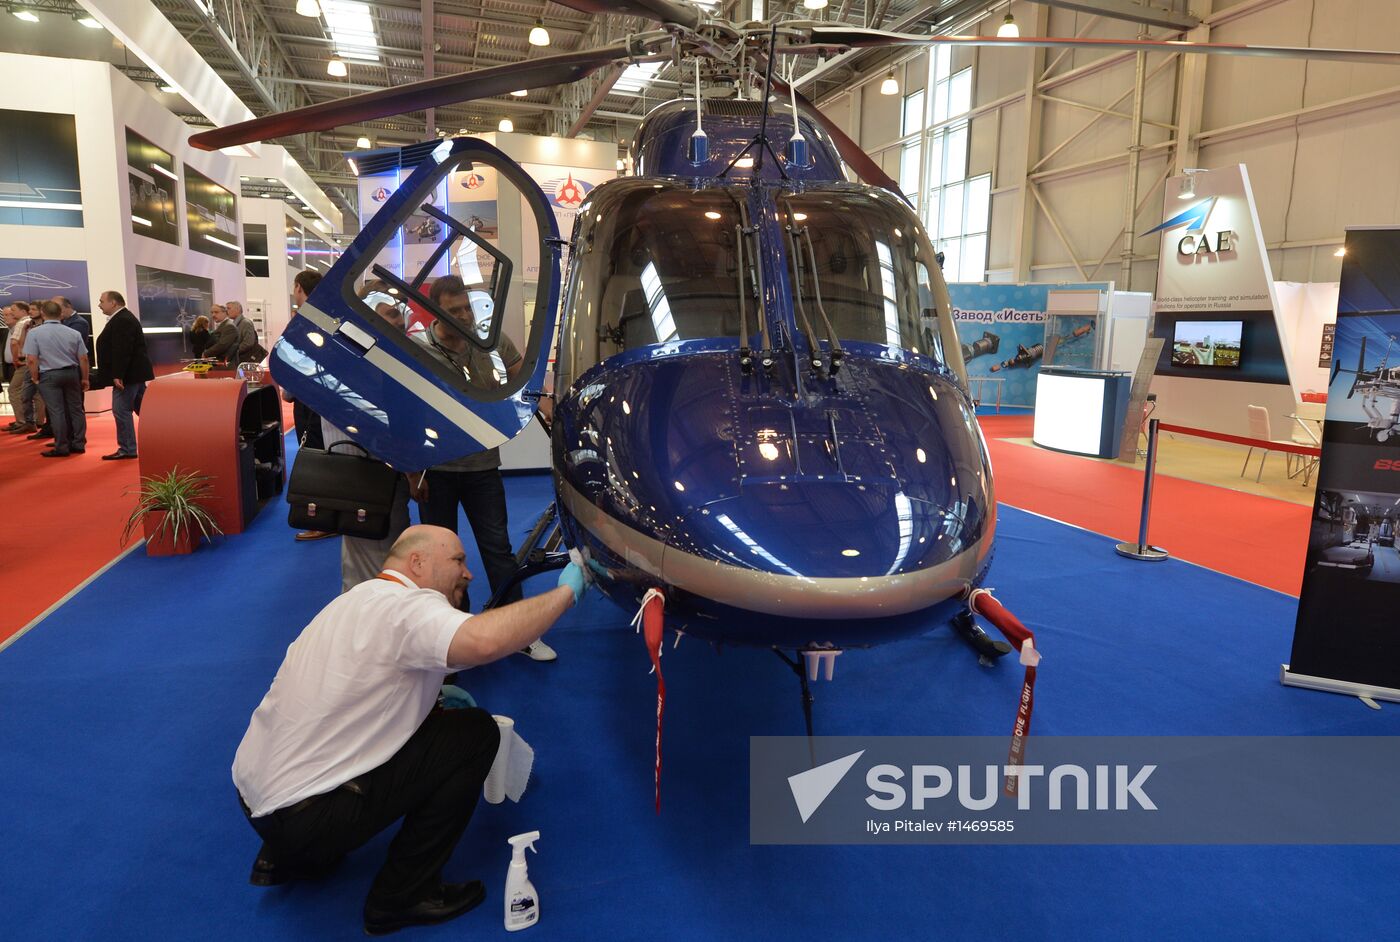 HeliRussia 2013, an exhibition of helicopter industry